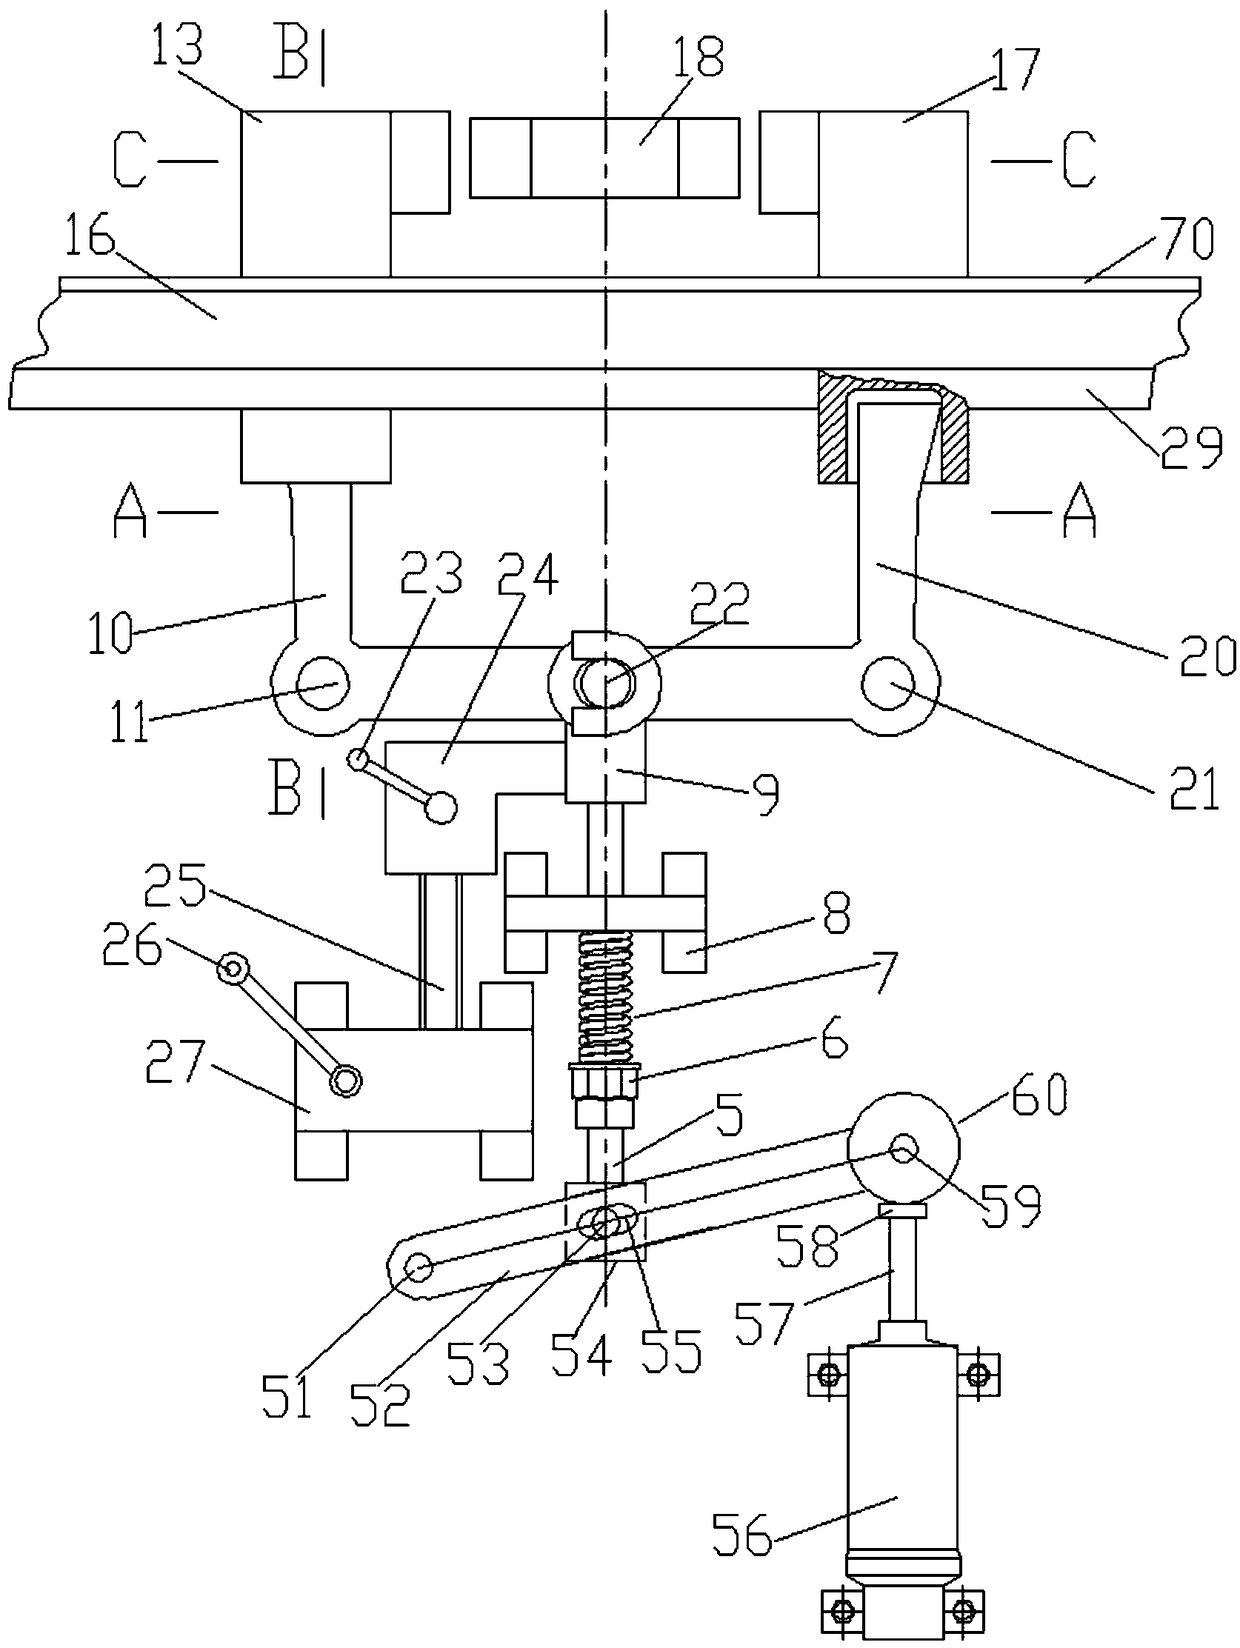 Rack and pinion lifting equipment horizontal electromagnetic lever safety brake device